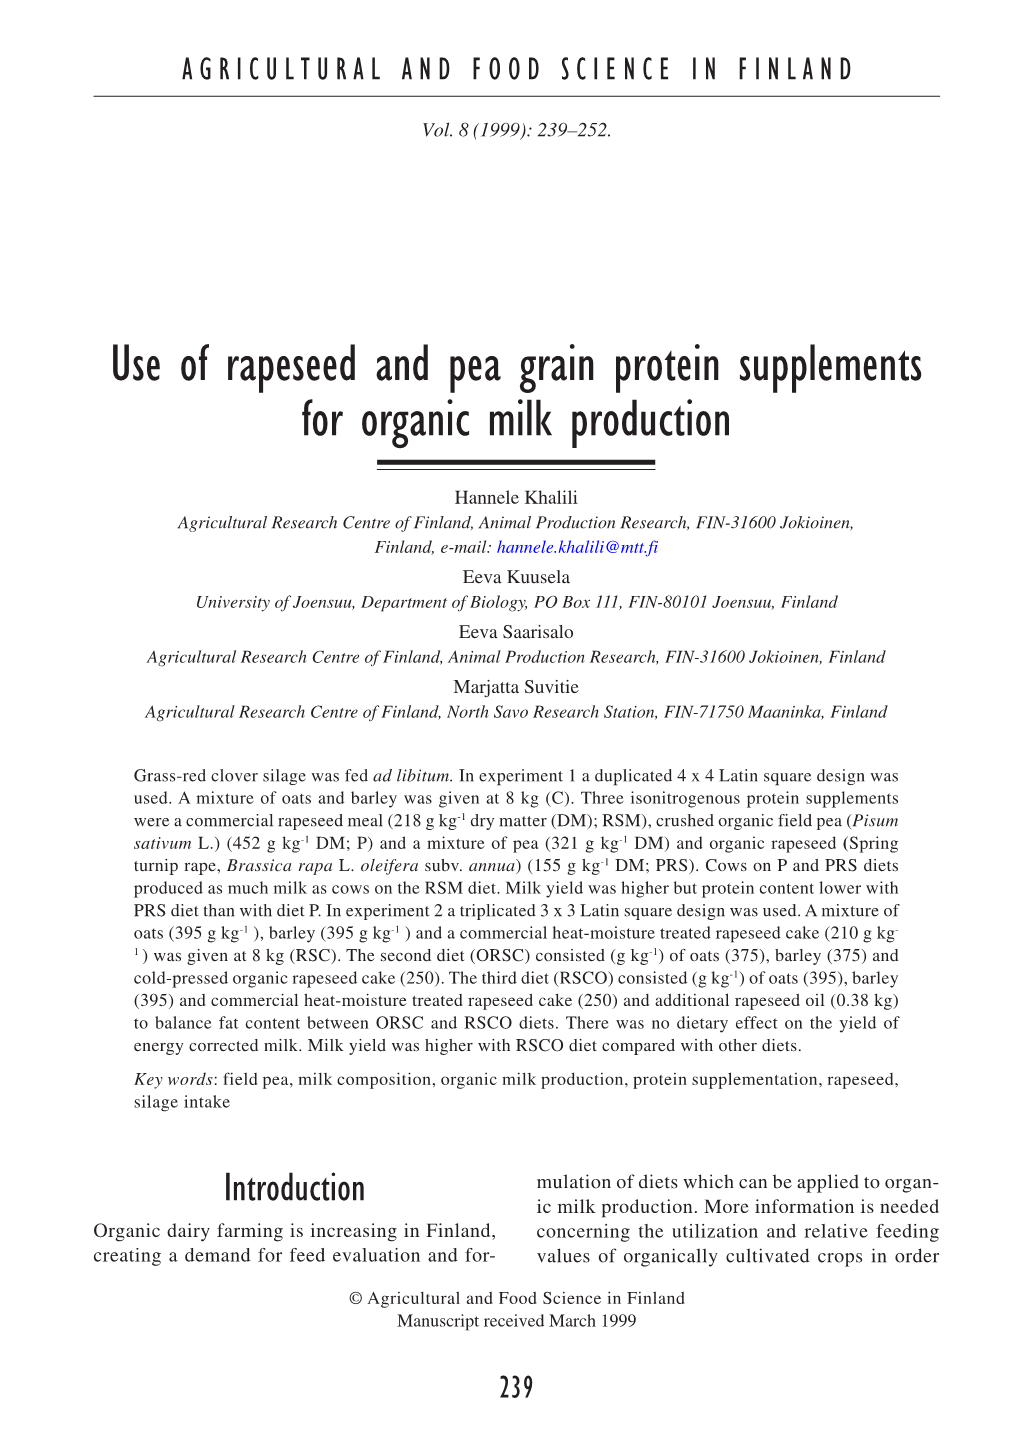 Use of Rapeseed and Pea Grain Protein Supplements for Organic Milk Production